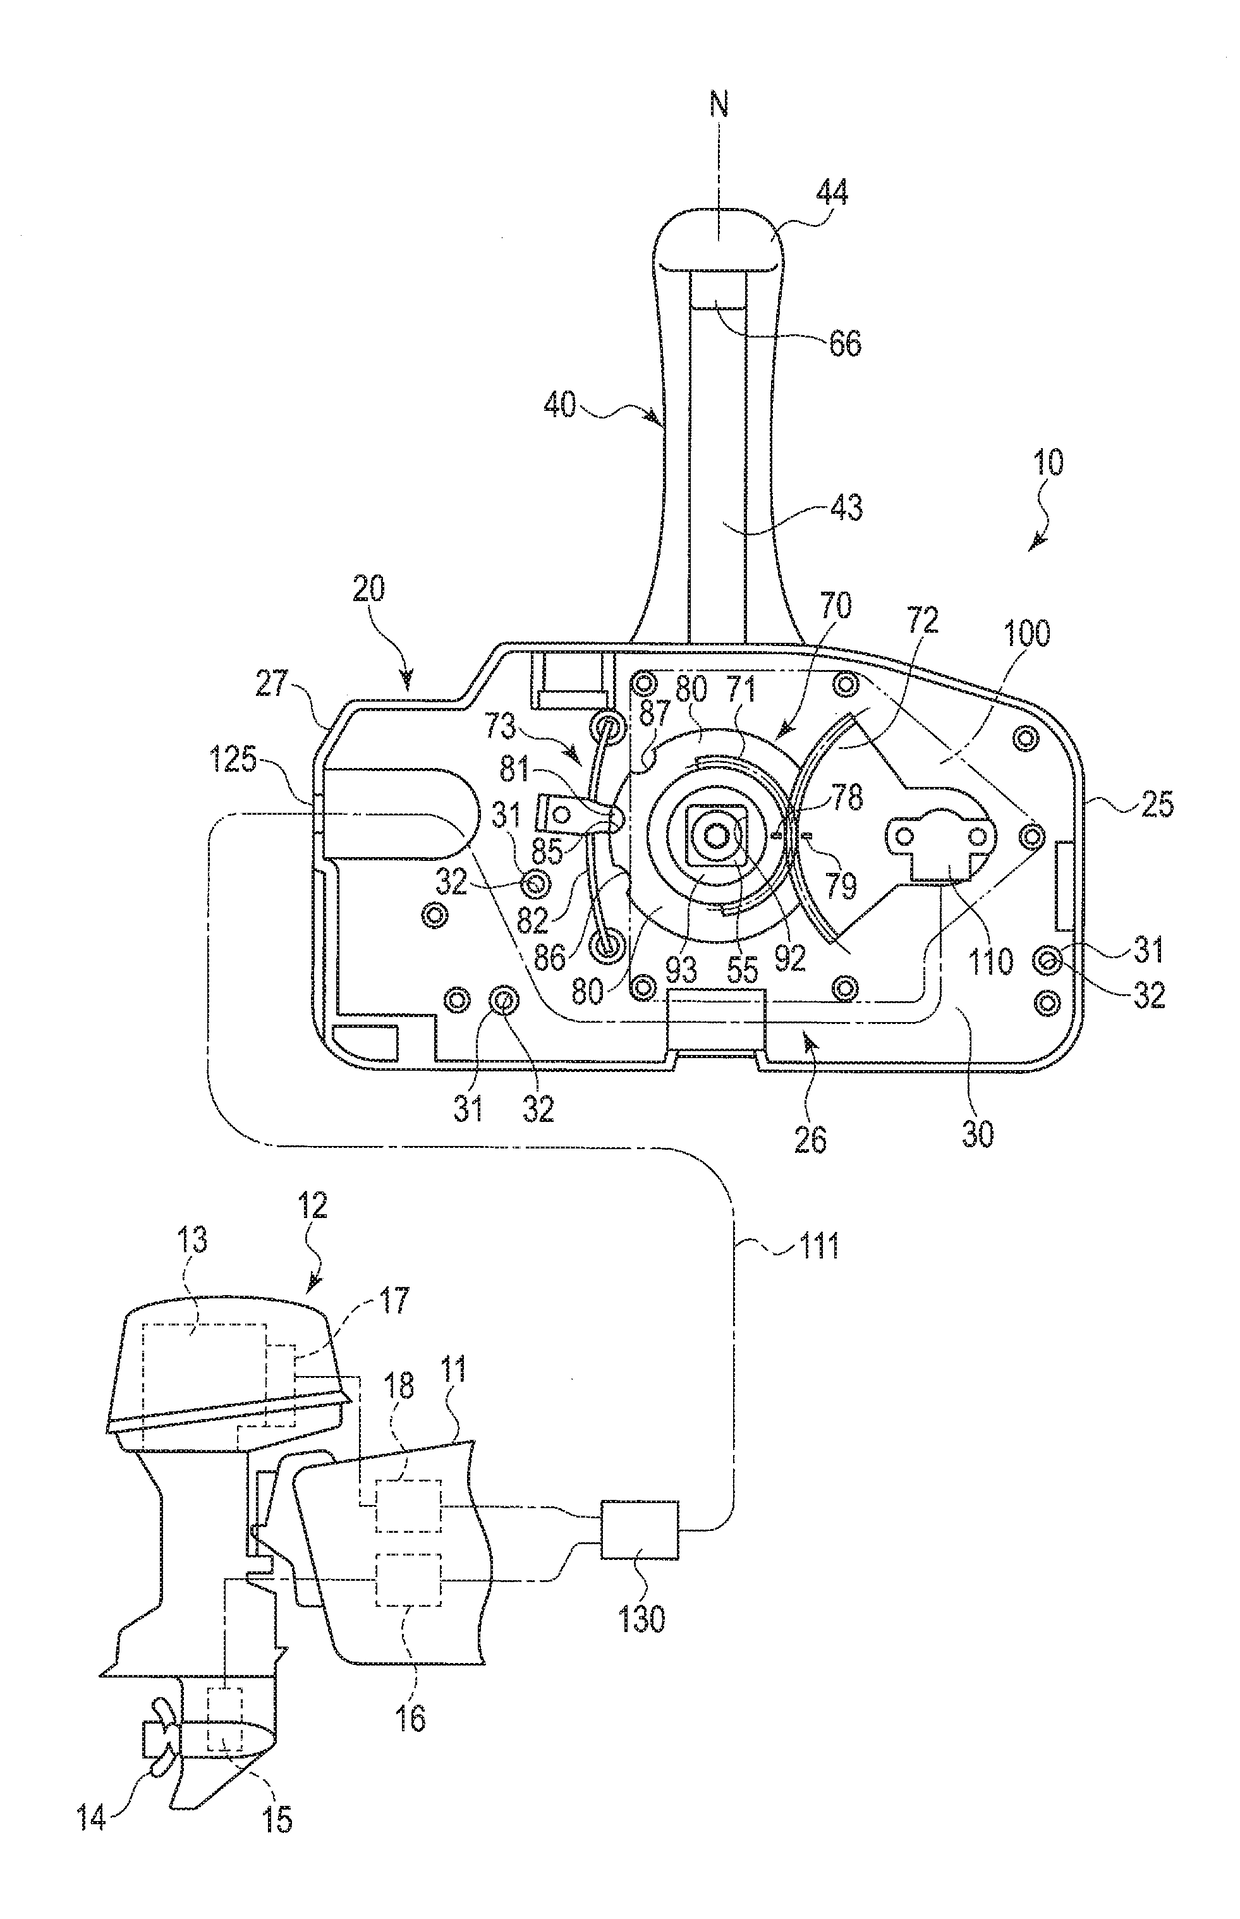 Side-mount type engine control apparatus